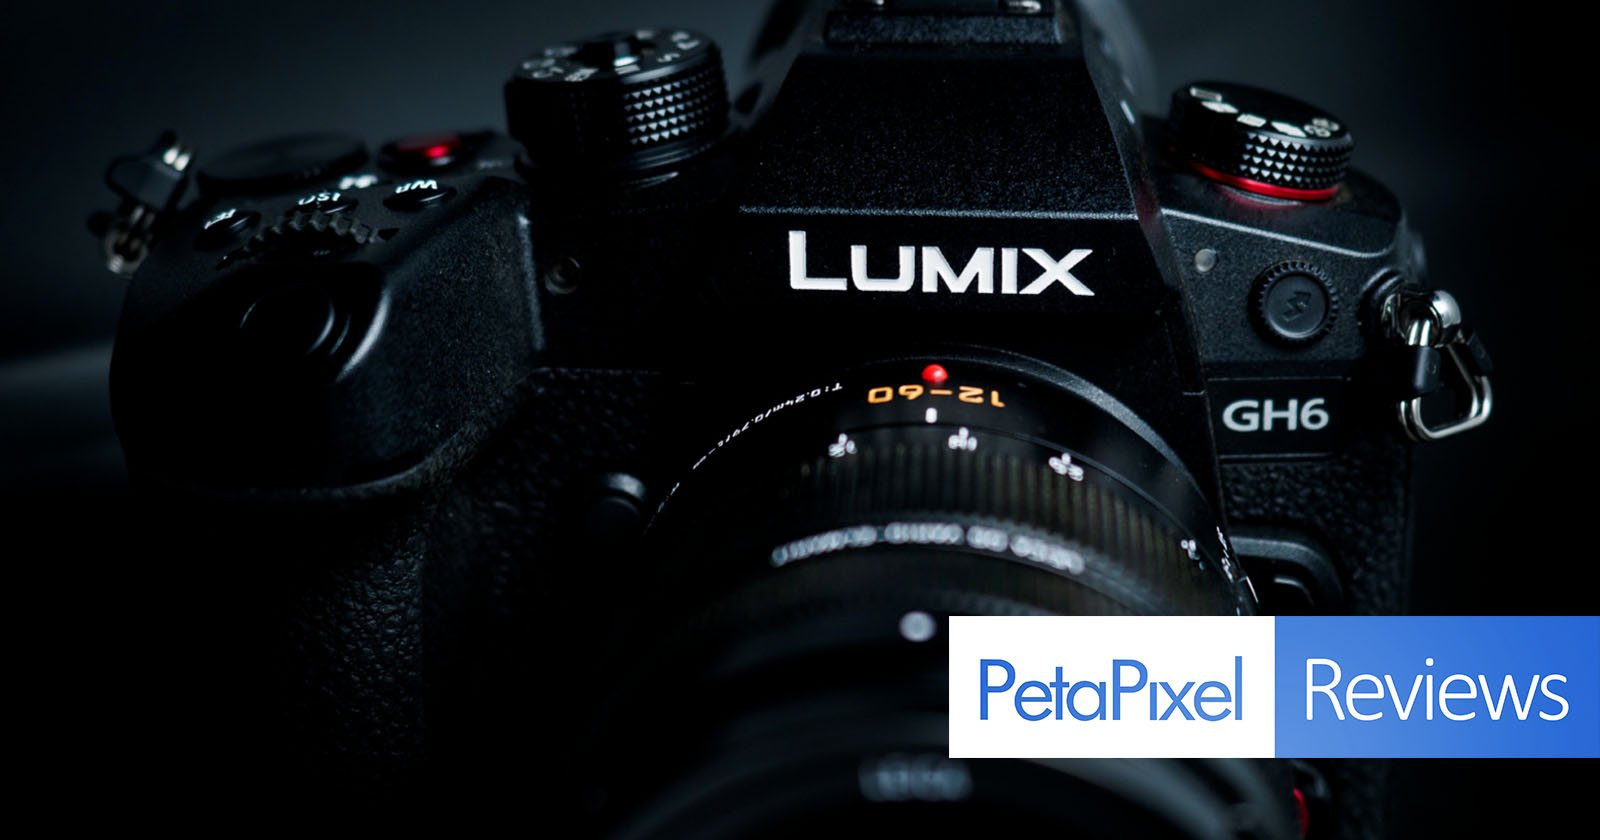 Panasonic GH6 Review One Of The Best Hybrid Cameras You Can Buy